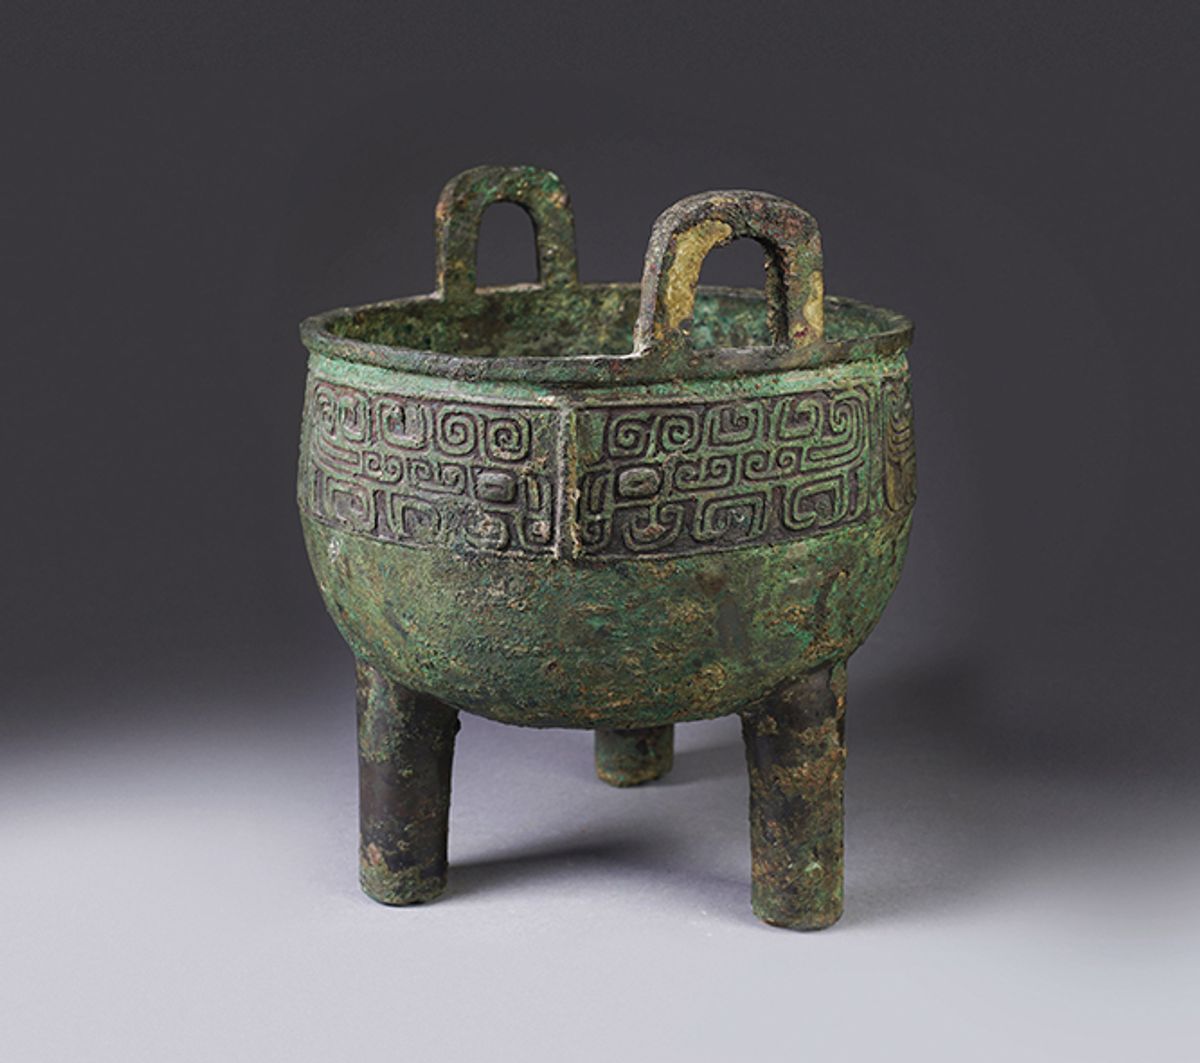 A Chinese archaic bronze ding, or food vessel, from the Western Zhou Dynasty, to be offered in iGavel's online auction Courtesy of iGavel Auctions